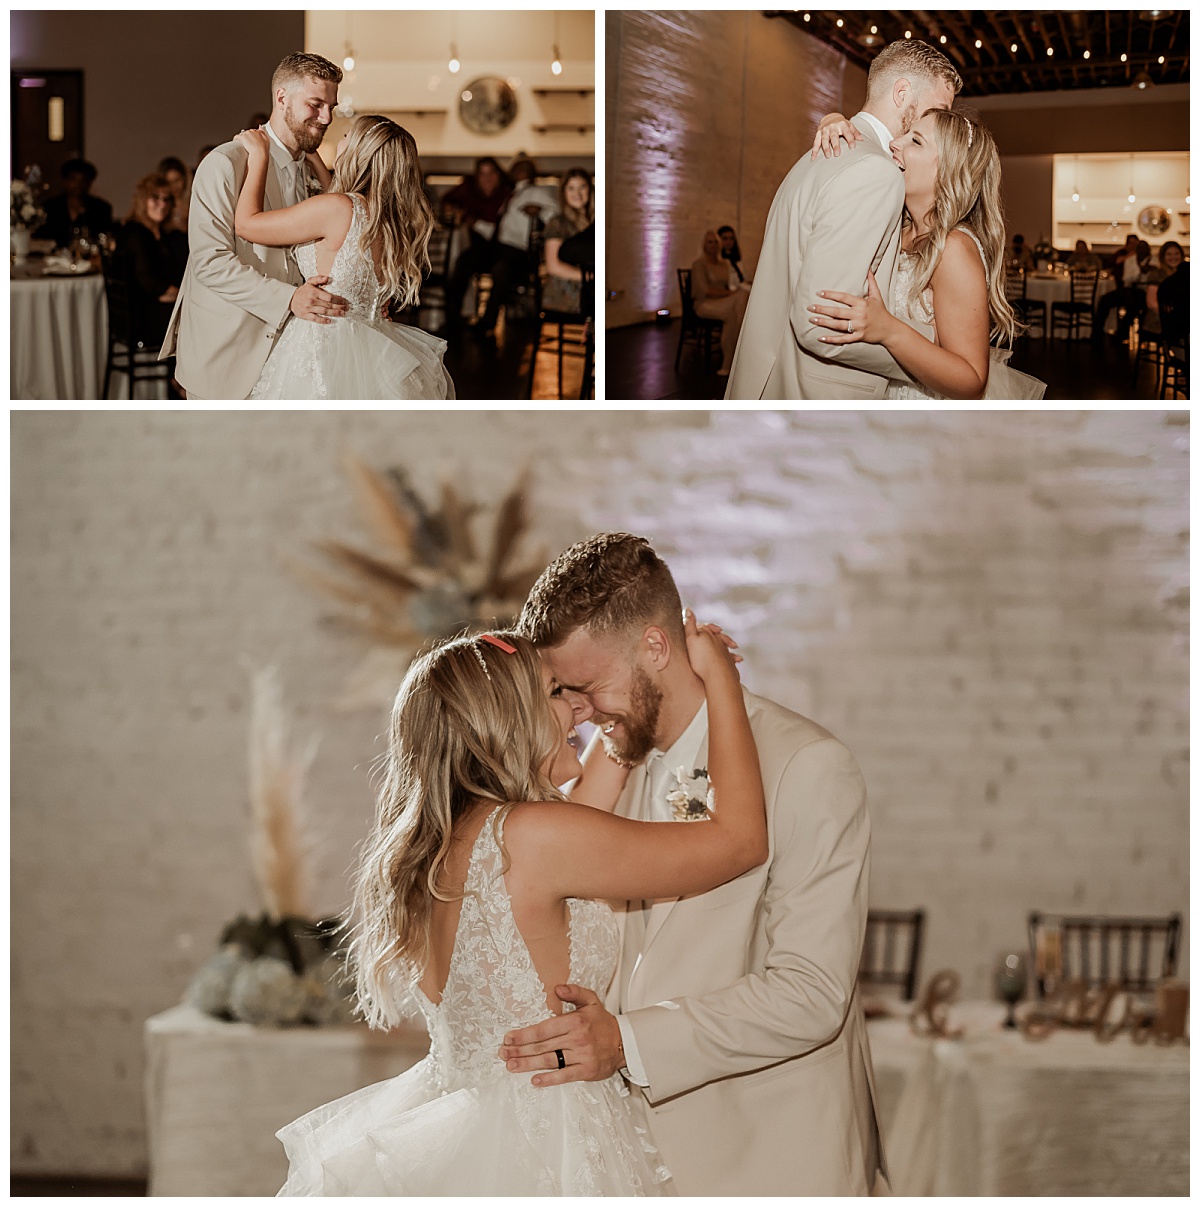 Bride and groom's first dance at wedding reception at Haus 820, a Lakeland wedding venue. 